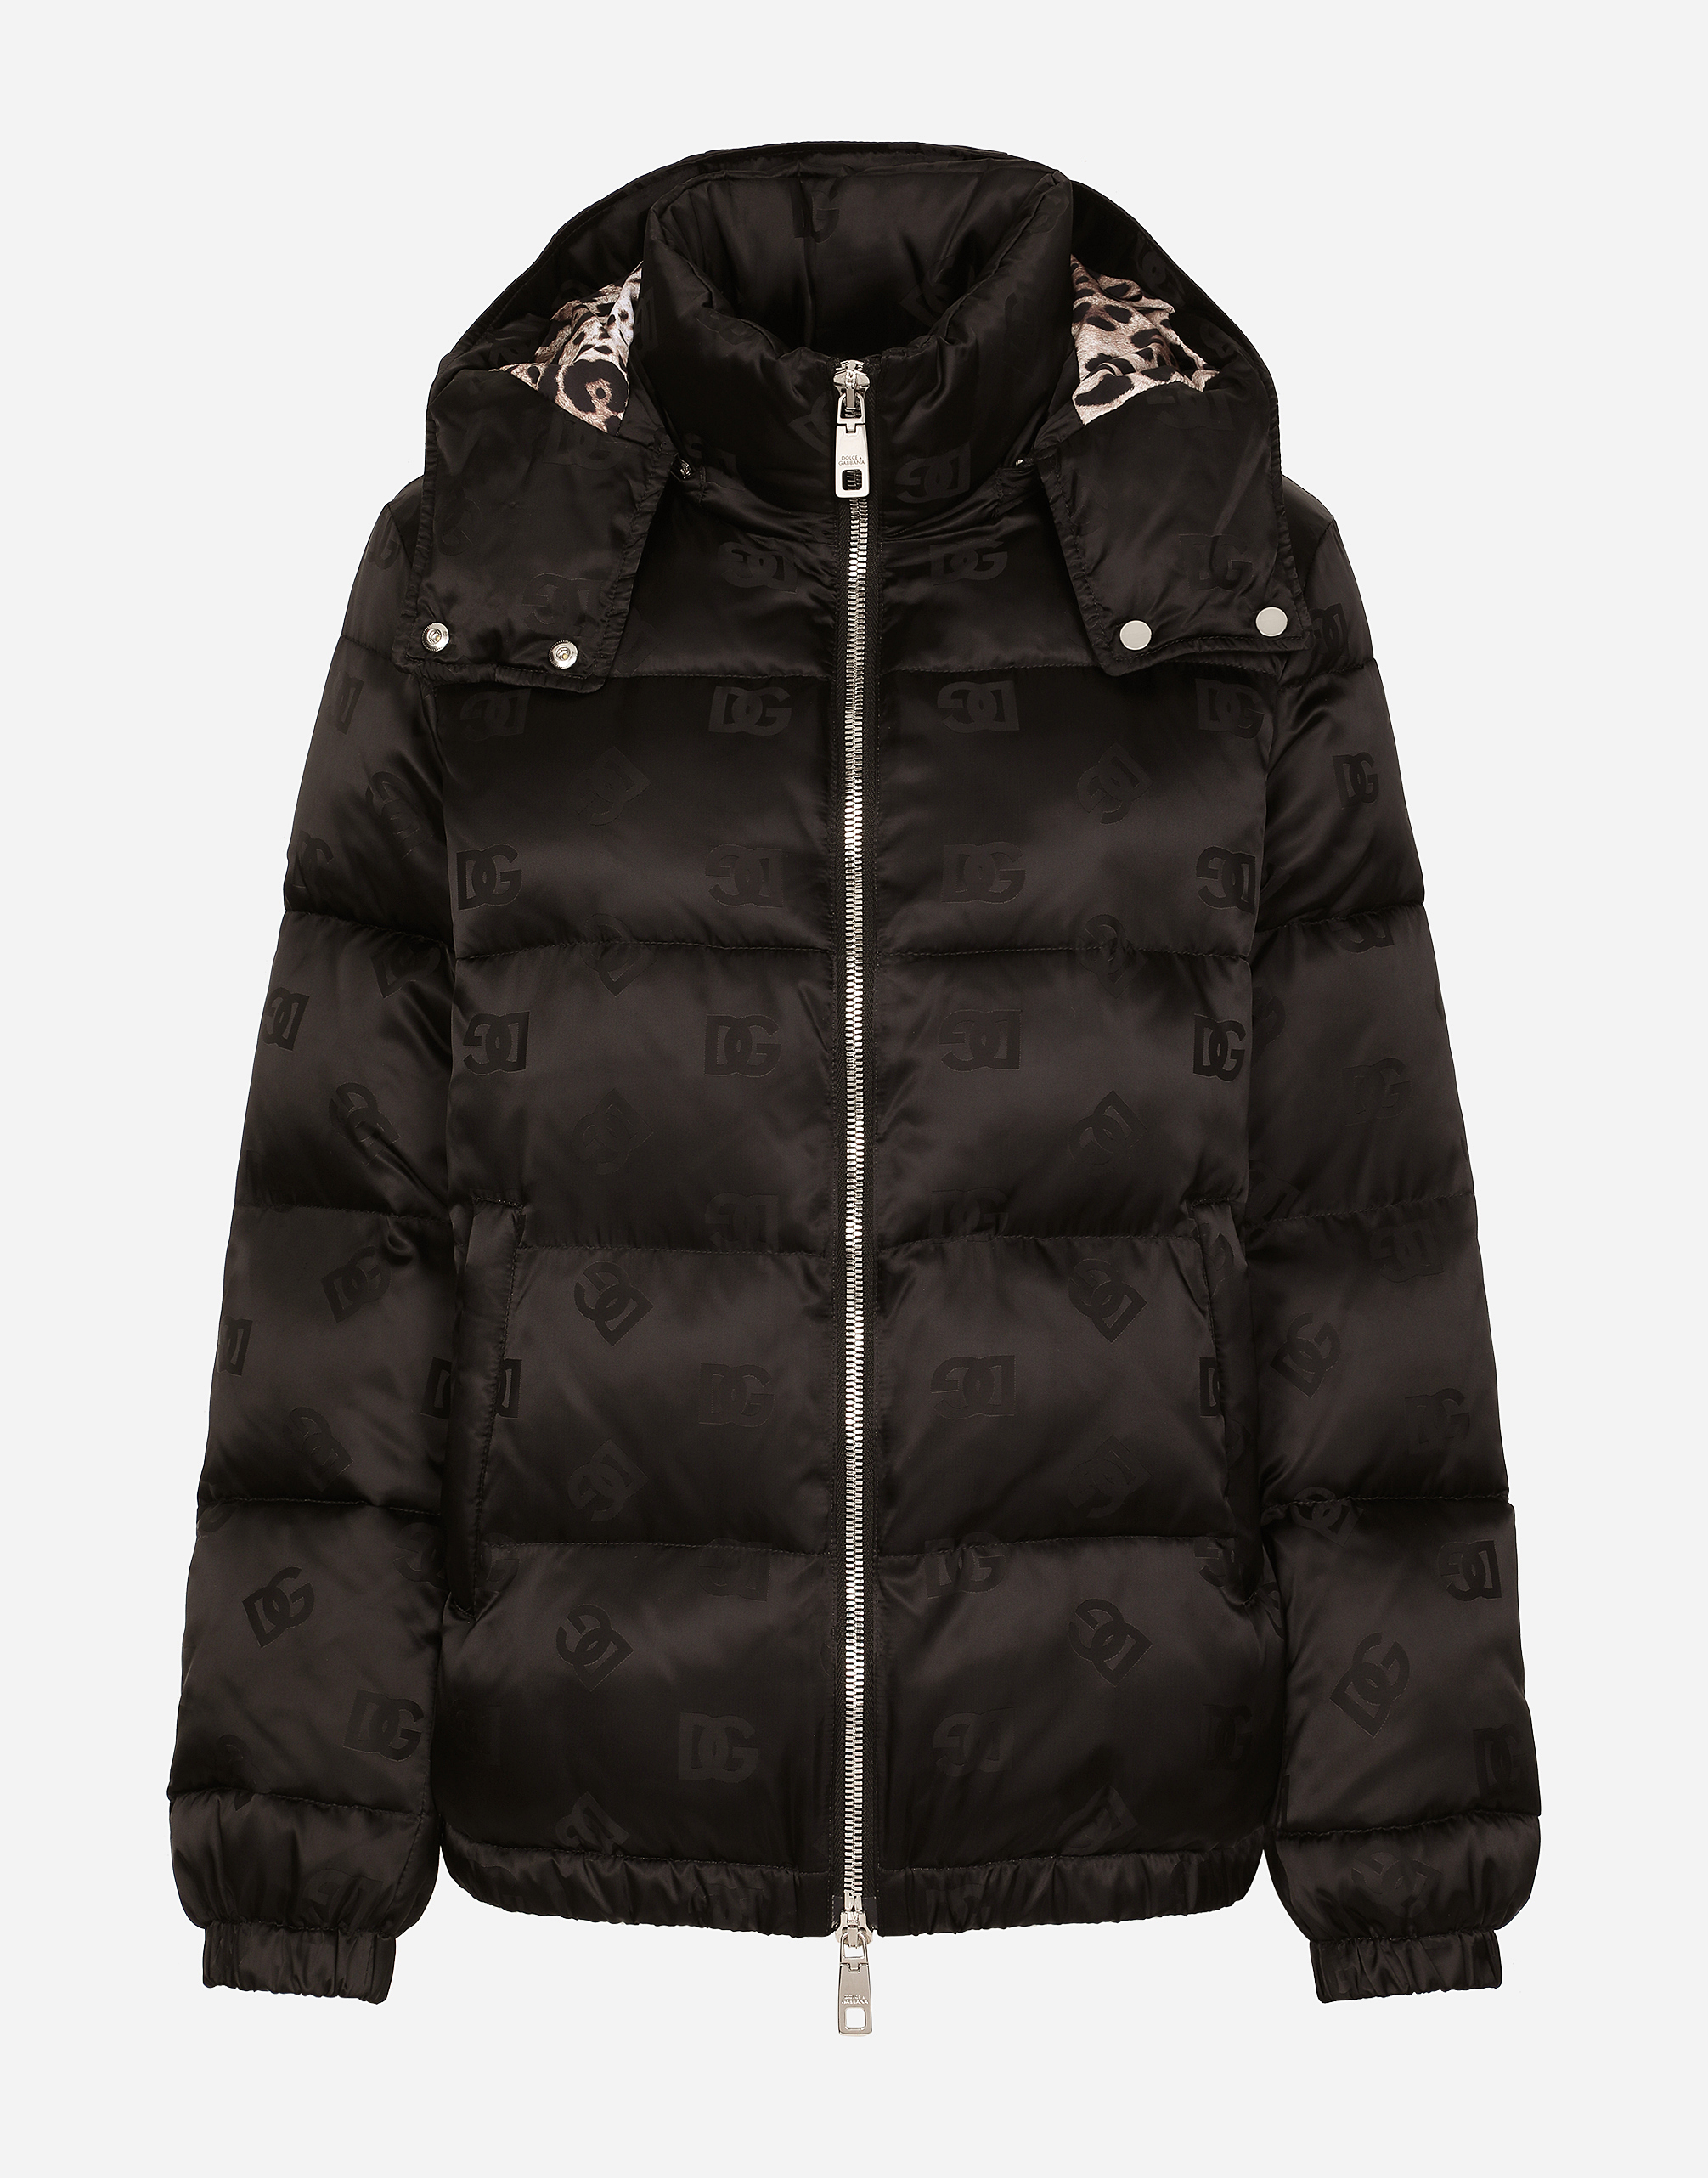 Dolce & Gabbana Satin Jacquard Down Jacket With All-over Dg Logo In Black